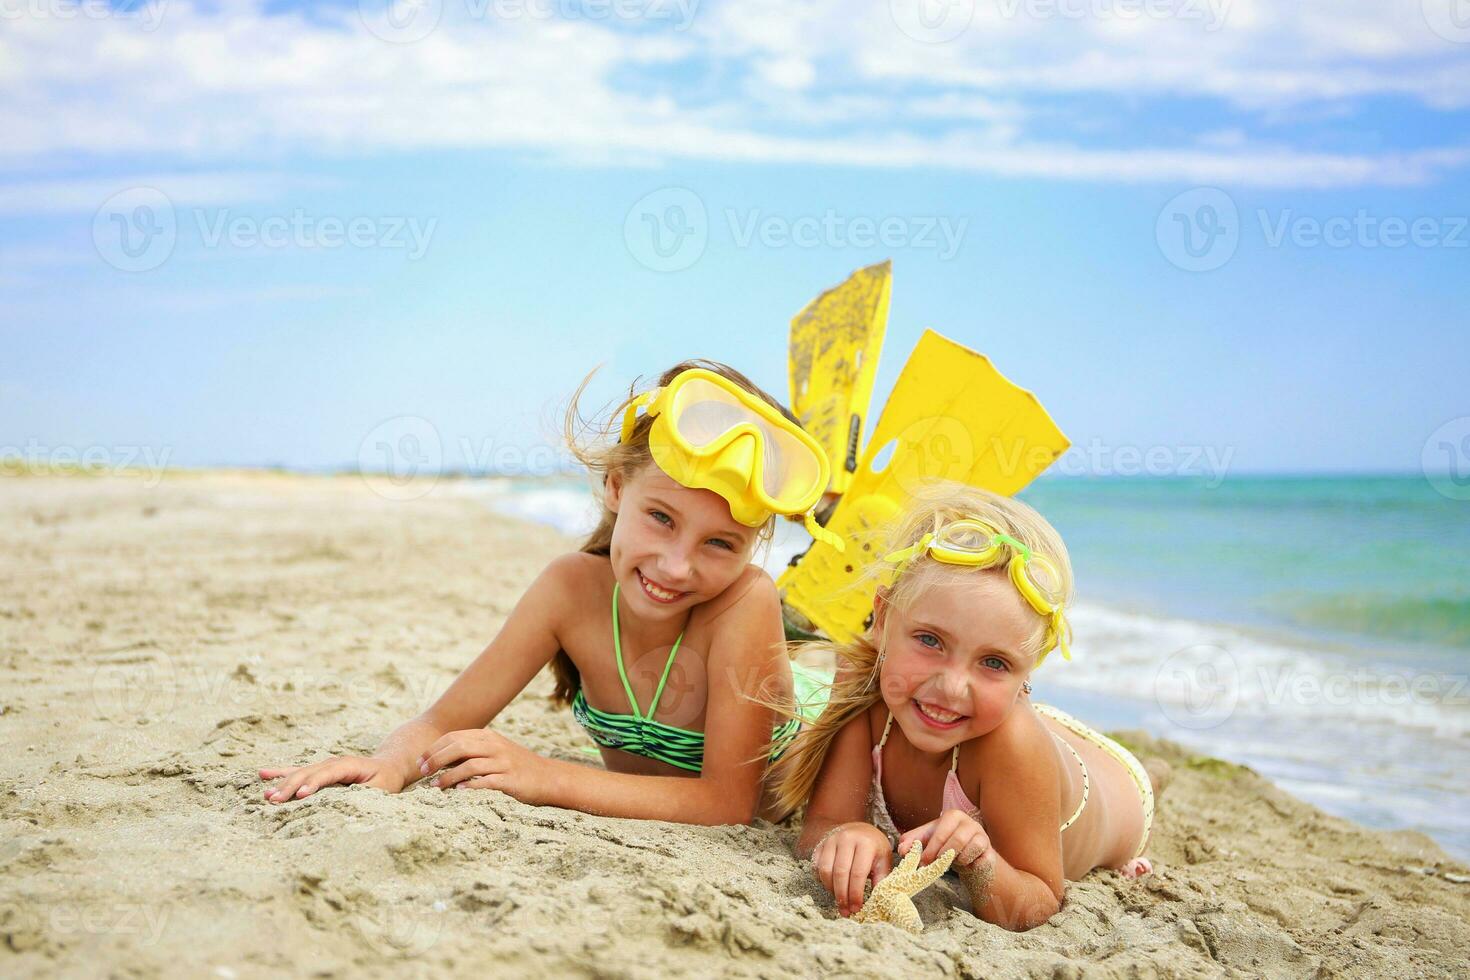 Girls sunbathing on beach in mask and fins for scuba diving. photo